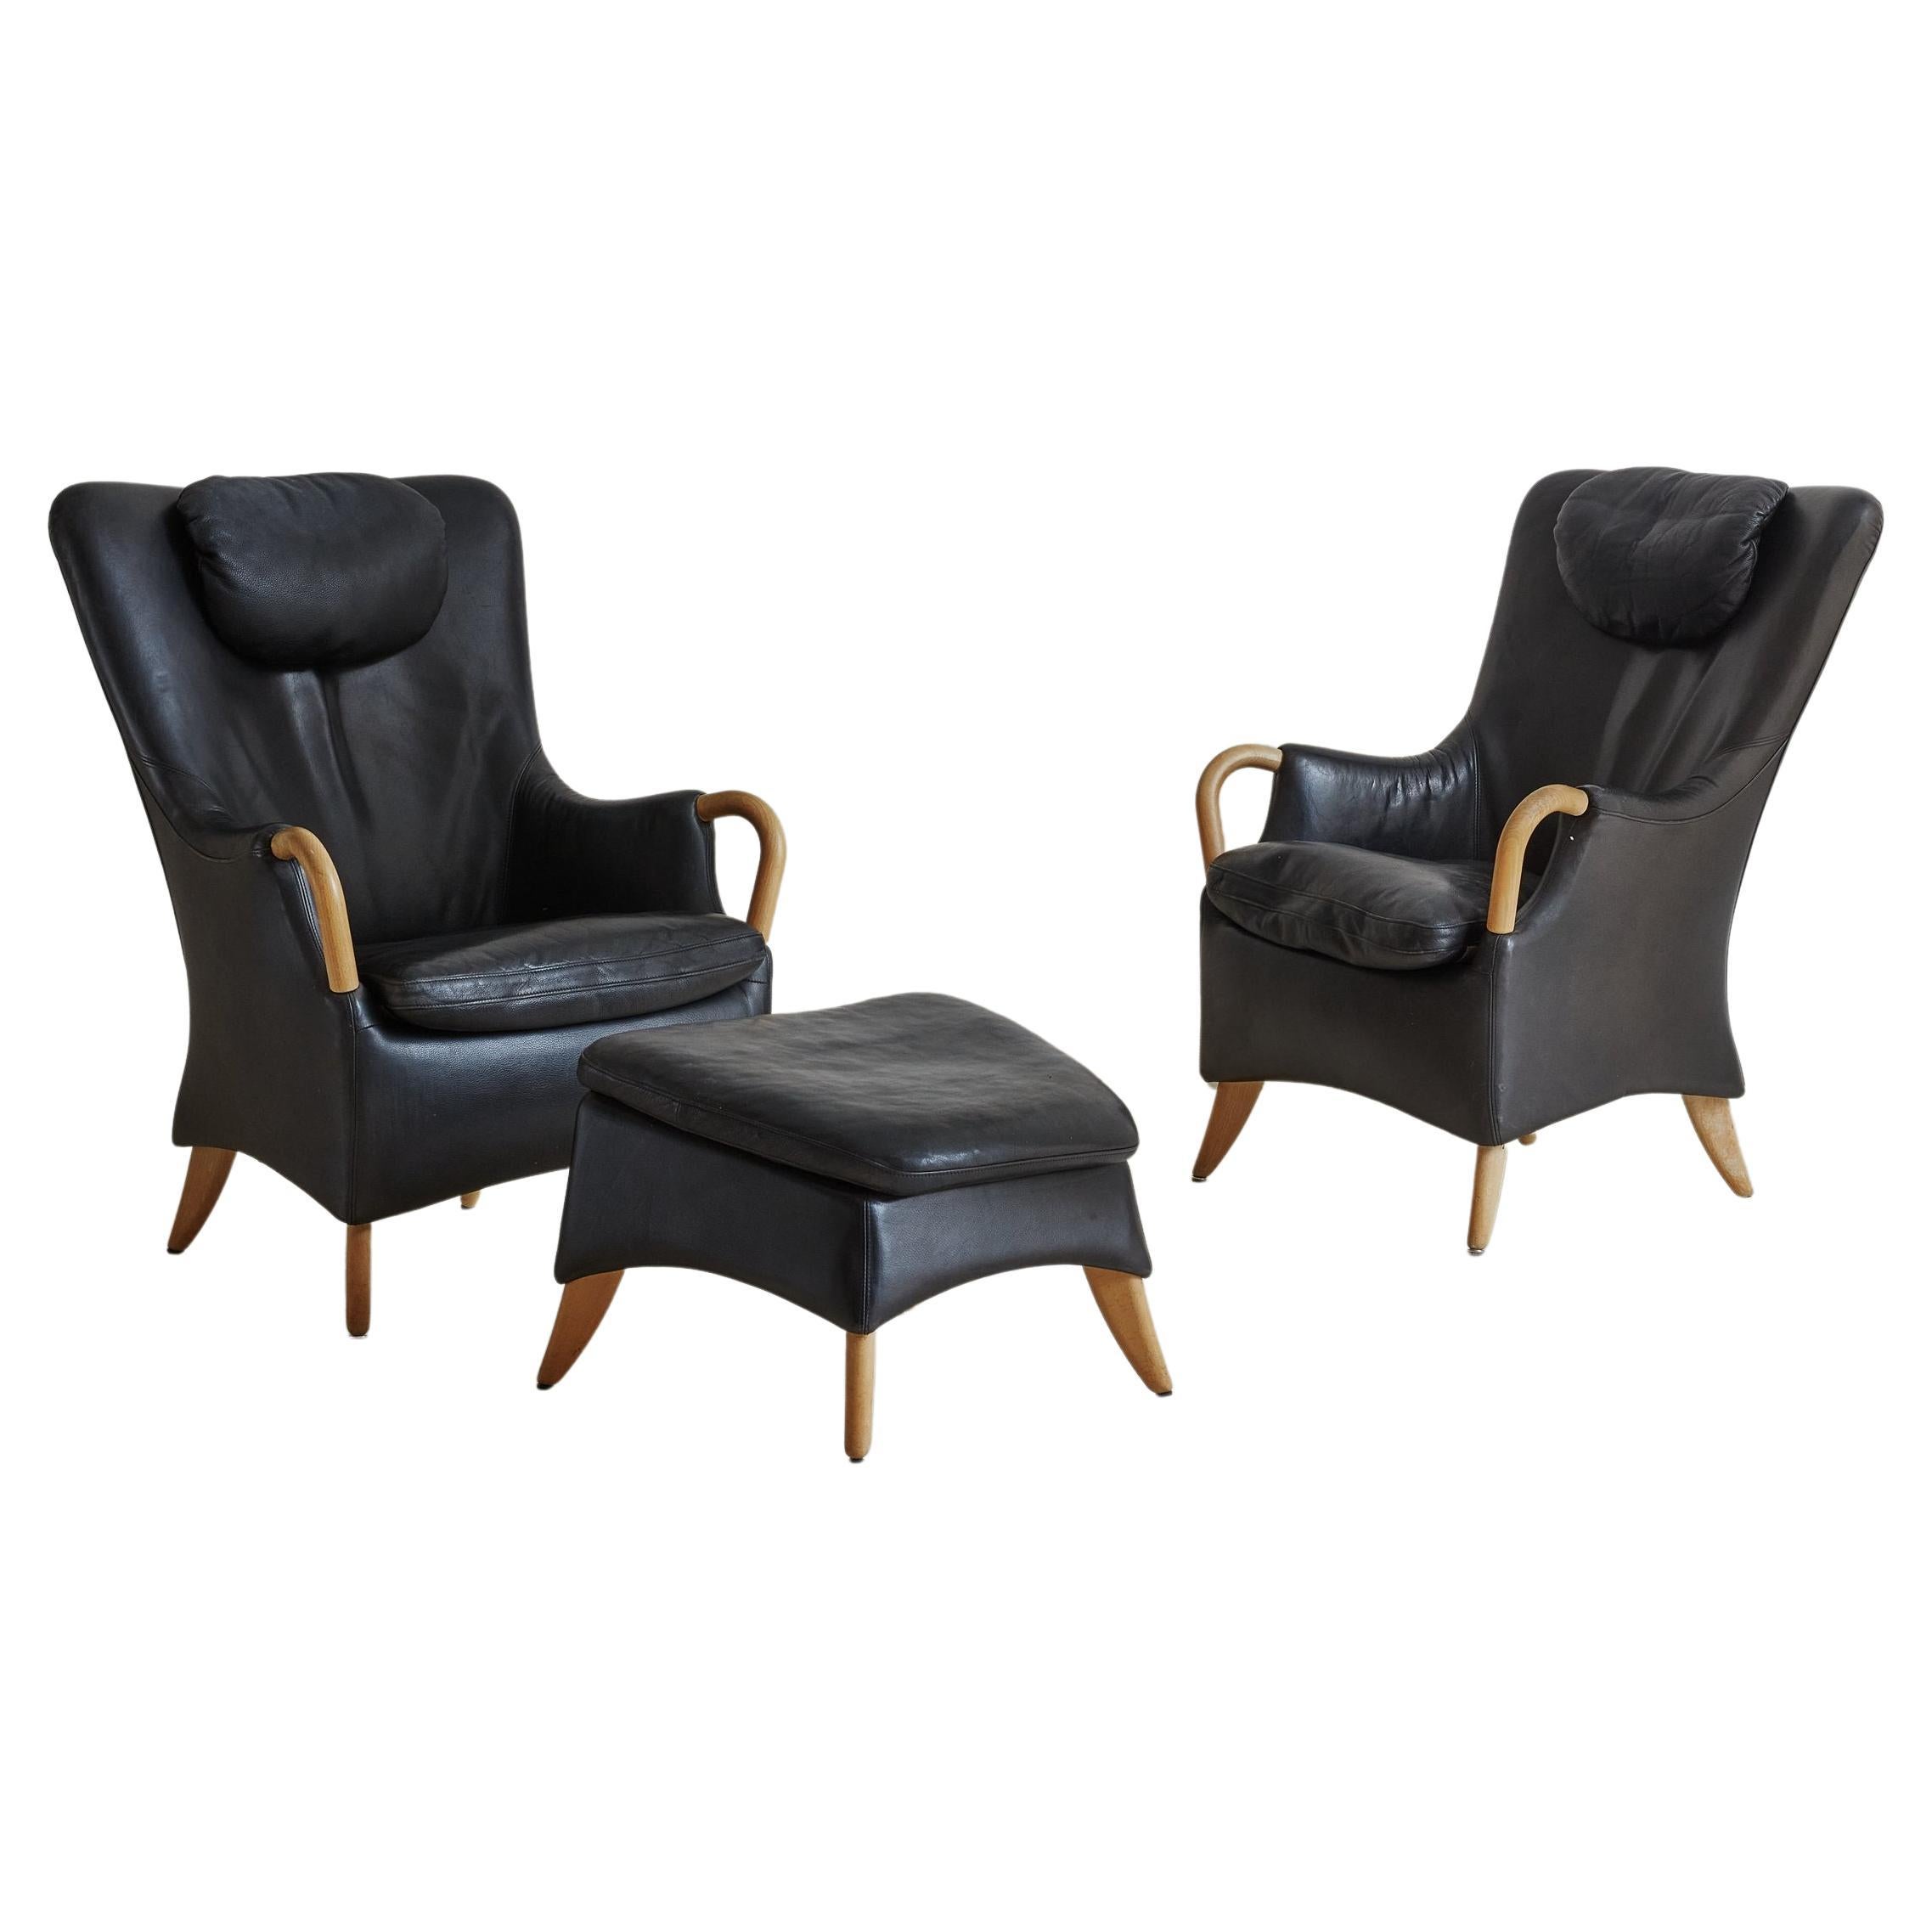 Pair of Black Leather Armchairs with Footstool by Both Søren Nissen & Ebbe Gehl